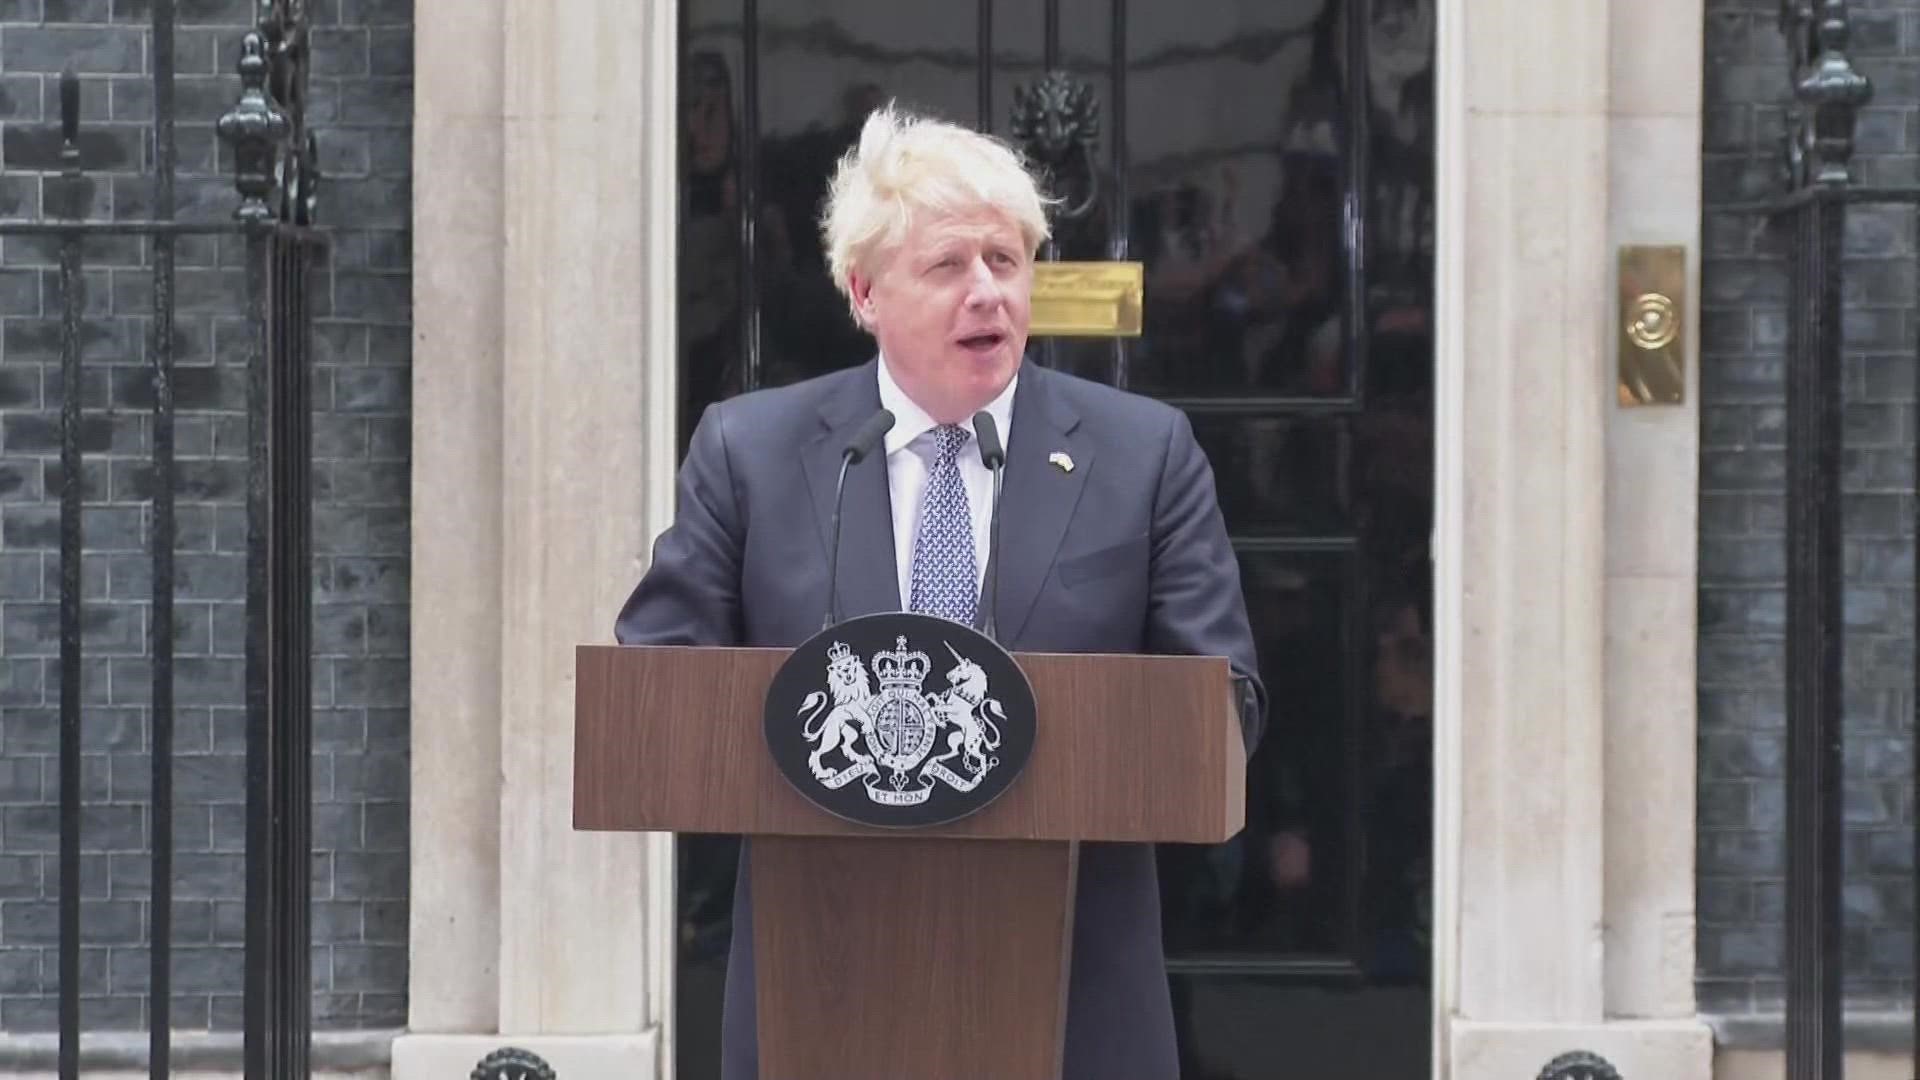 Boris Johnson addresses the public and formally announces that he will step down as Prime Minister of the United Kingdom.